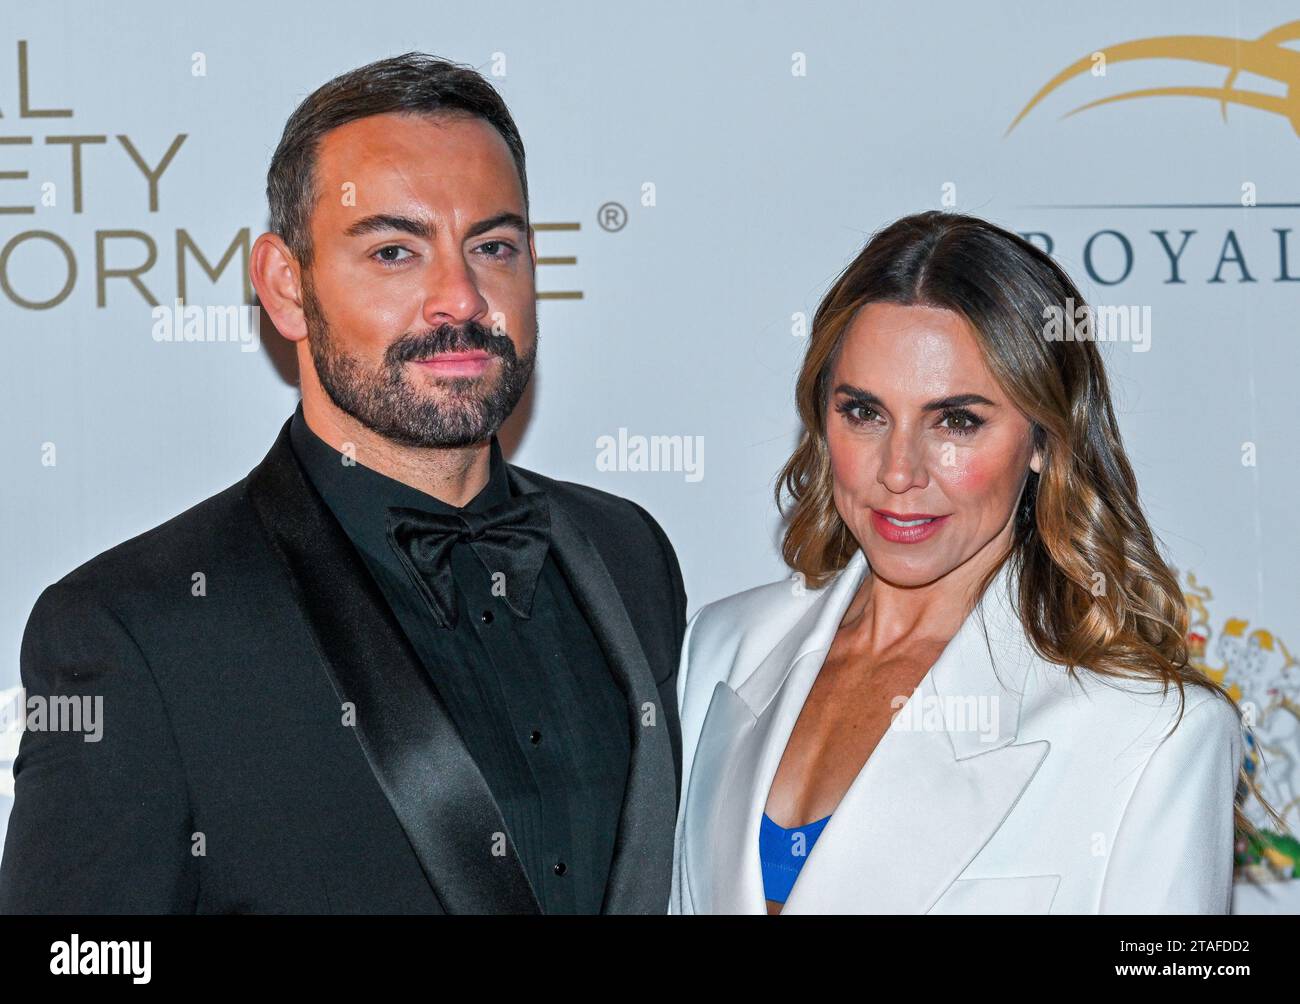 London, UK. 30th Nov, 2023. (L-R) Ben Forster and Melanie Chisholm attends the Royal Variety Performance being held at the Royal Albert Hall, London, UK. Credit: LFP/Alamy Live News Stock Photo